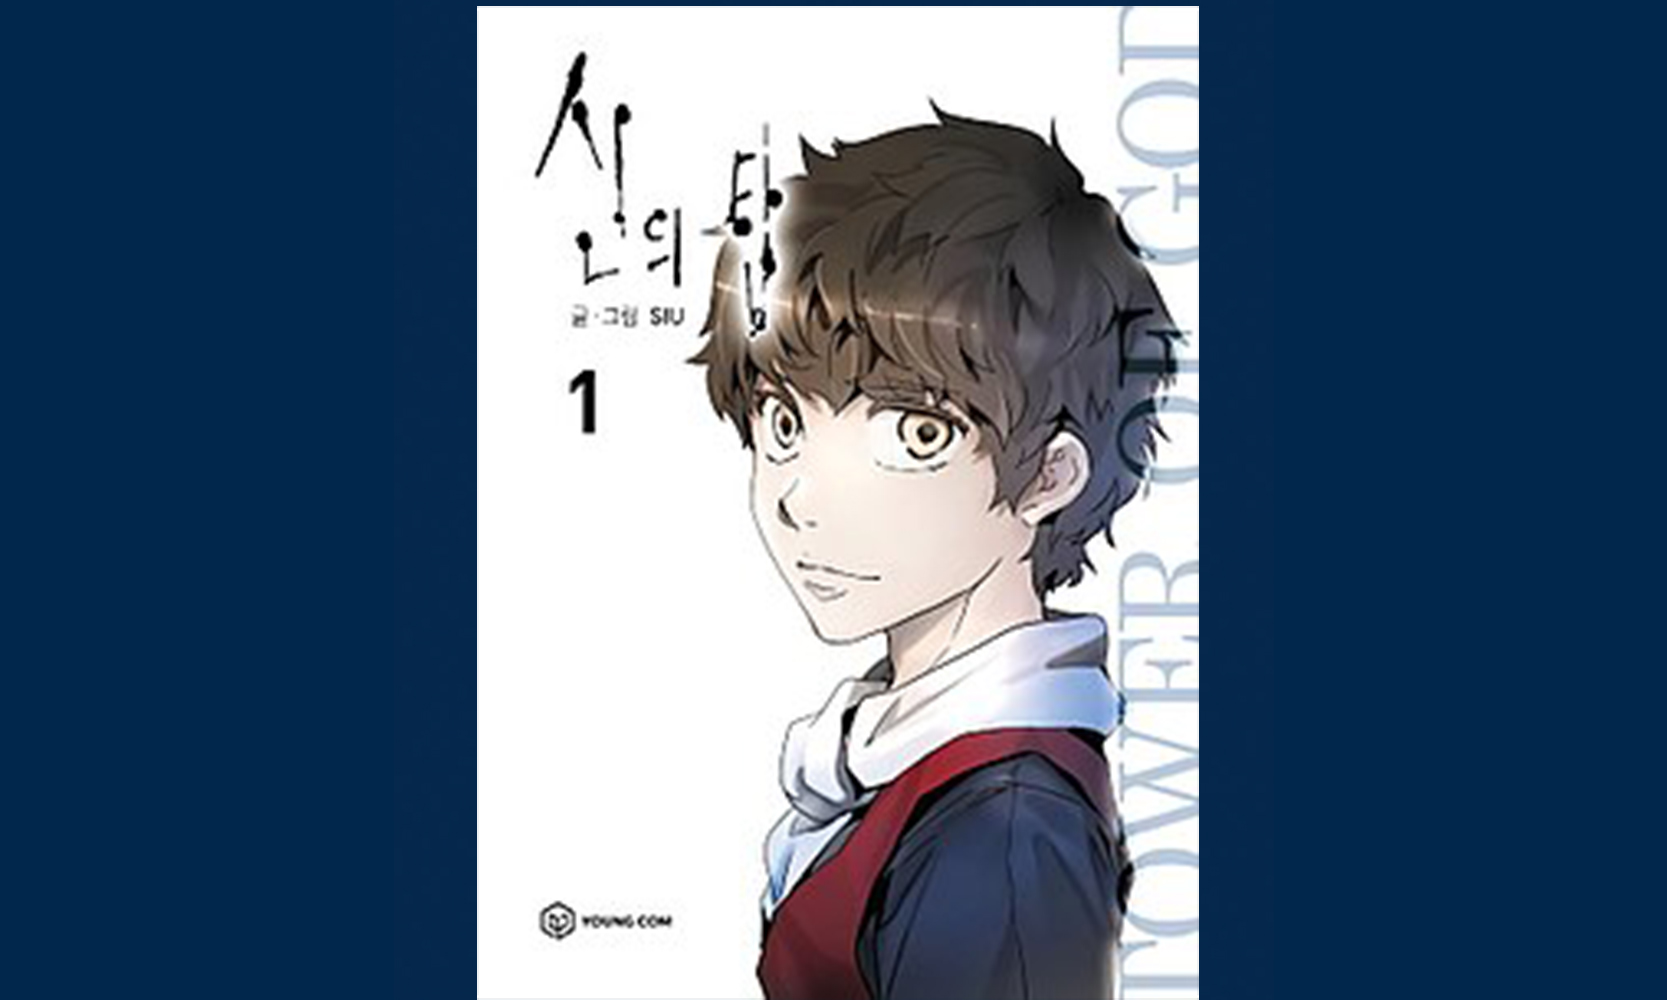 Cover of Tower of God, Book 1 by SIU